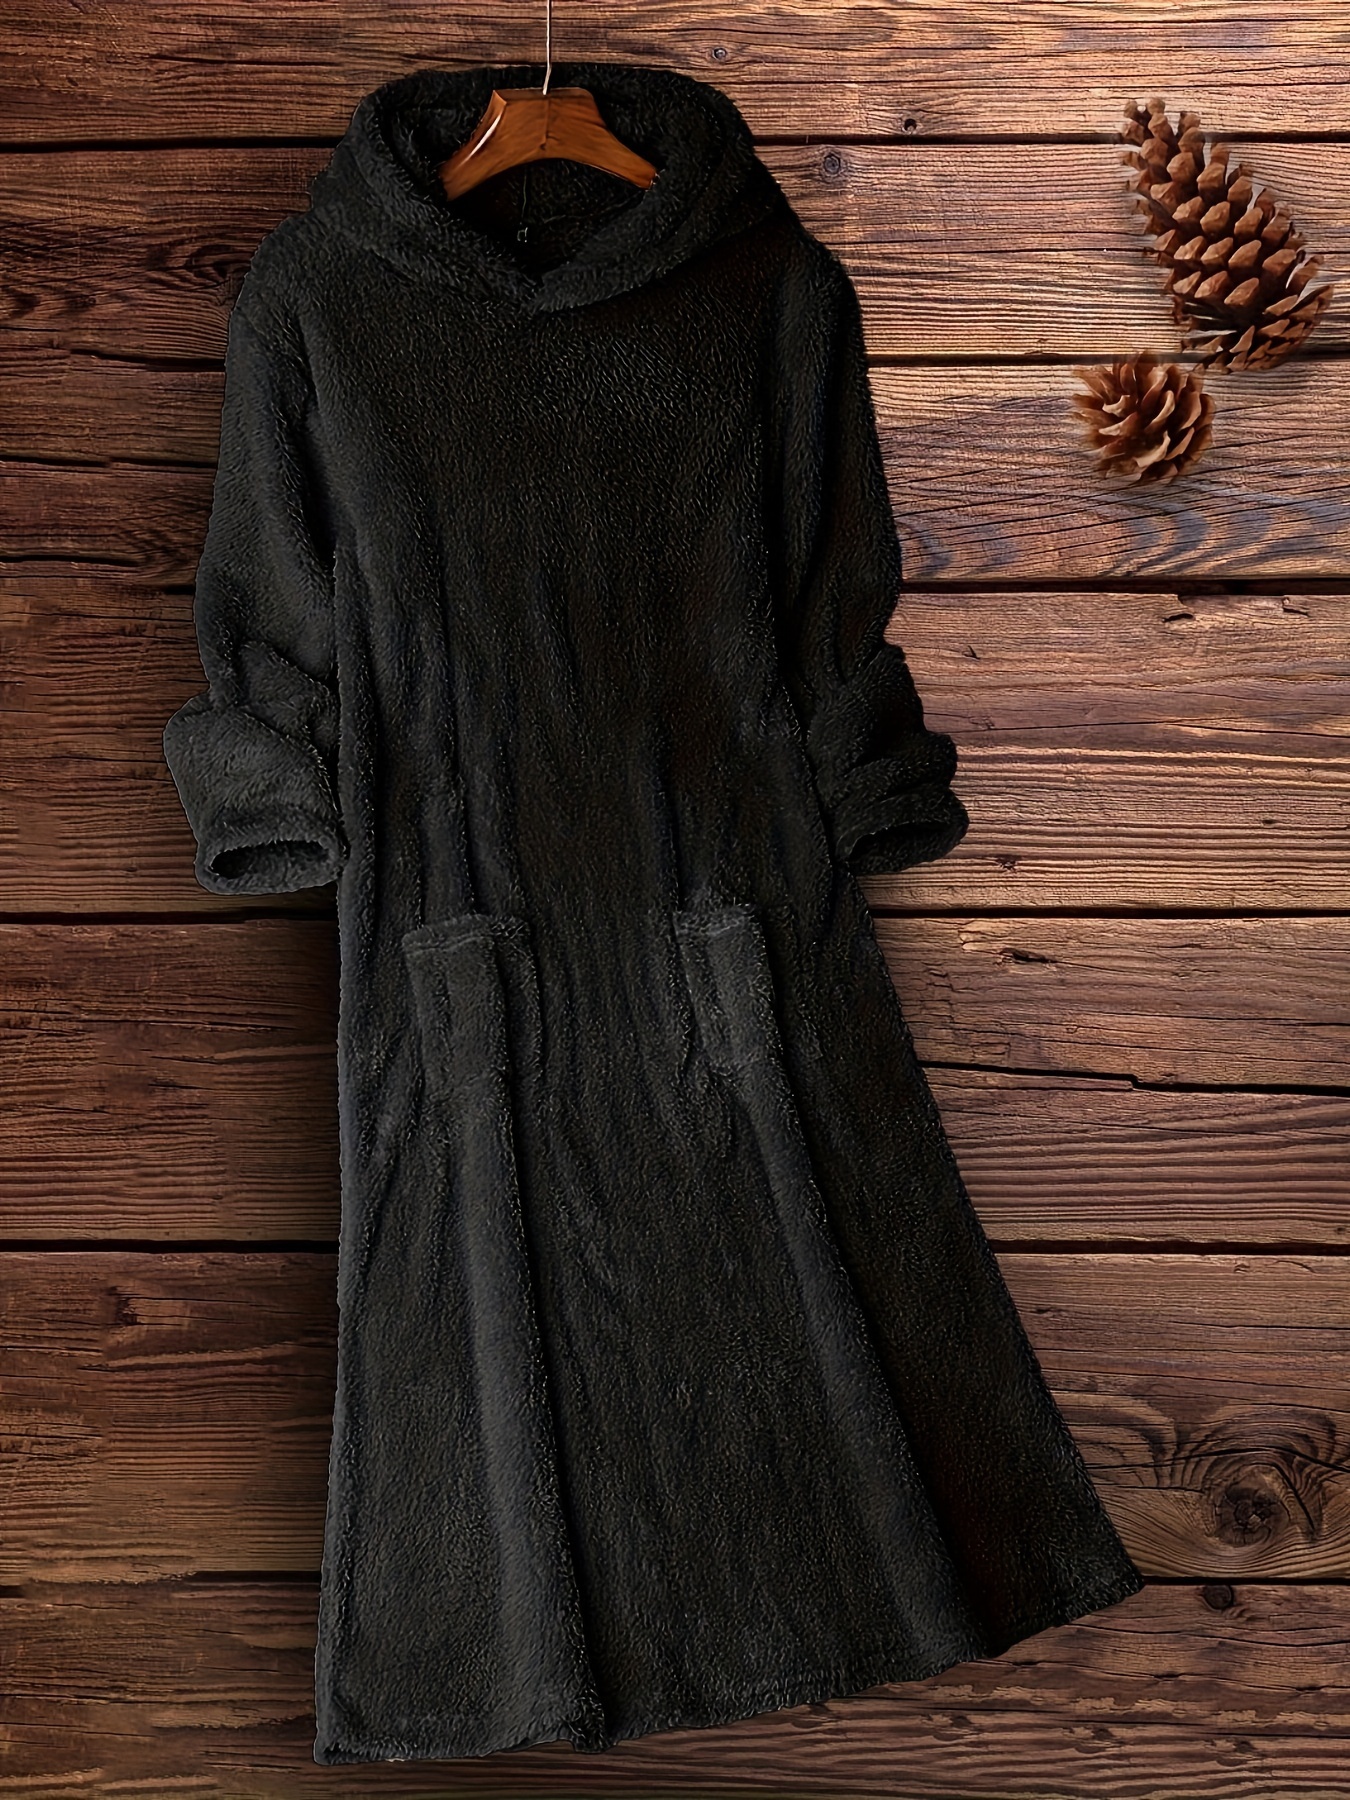 fuzzy hooded midi dress casual pocket front solid long sleeve dress womens clothing details 5